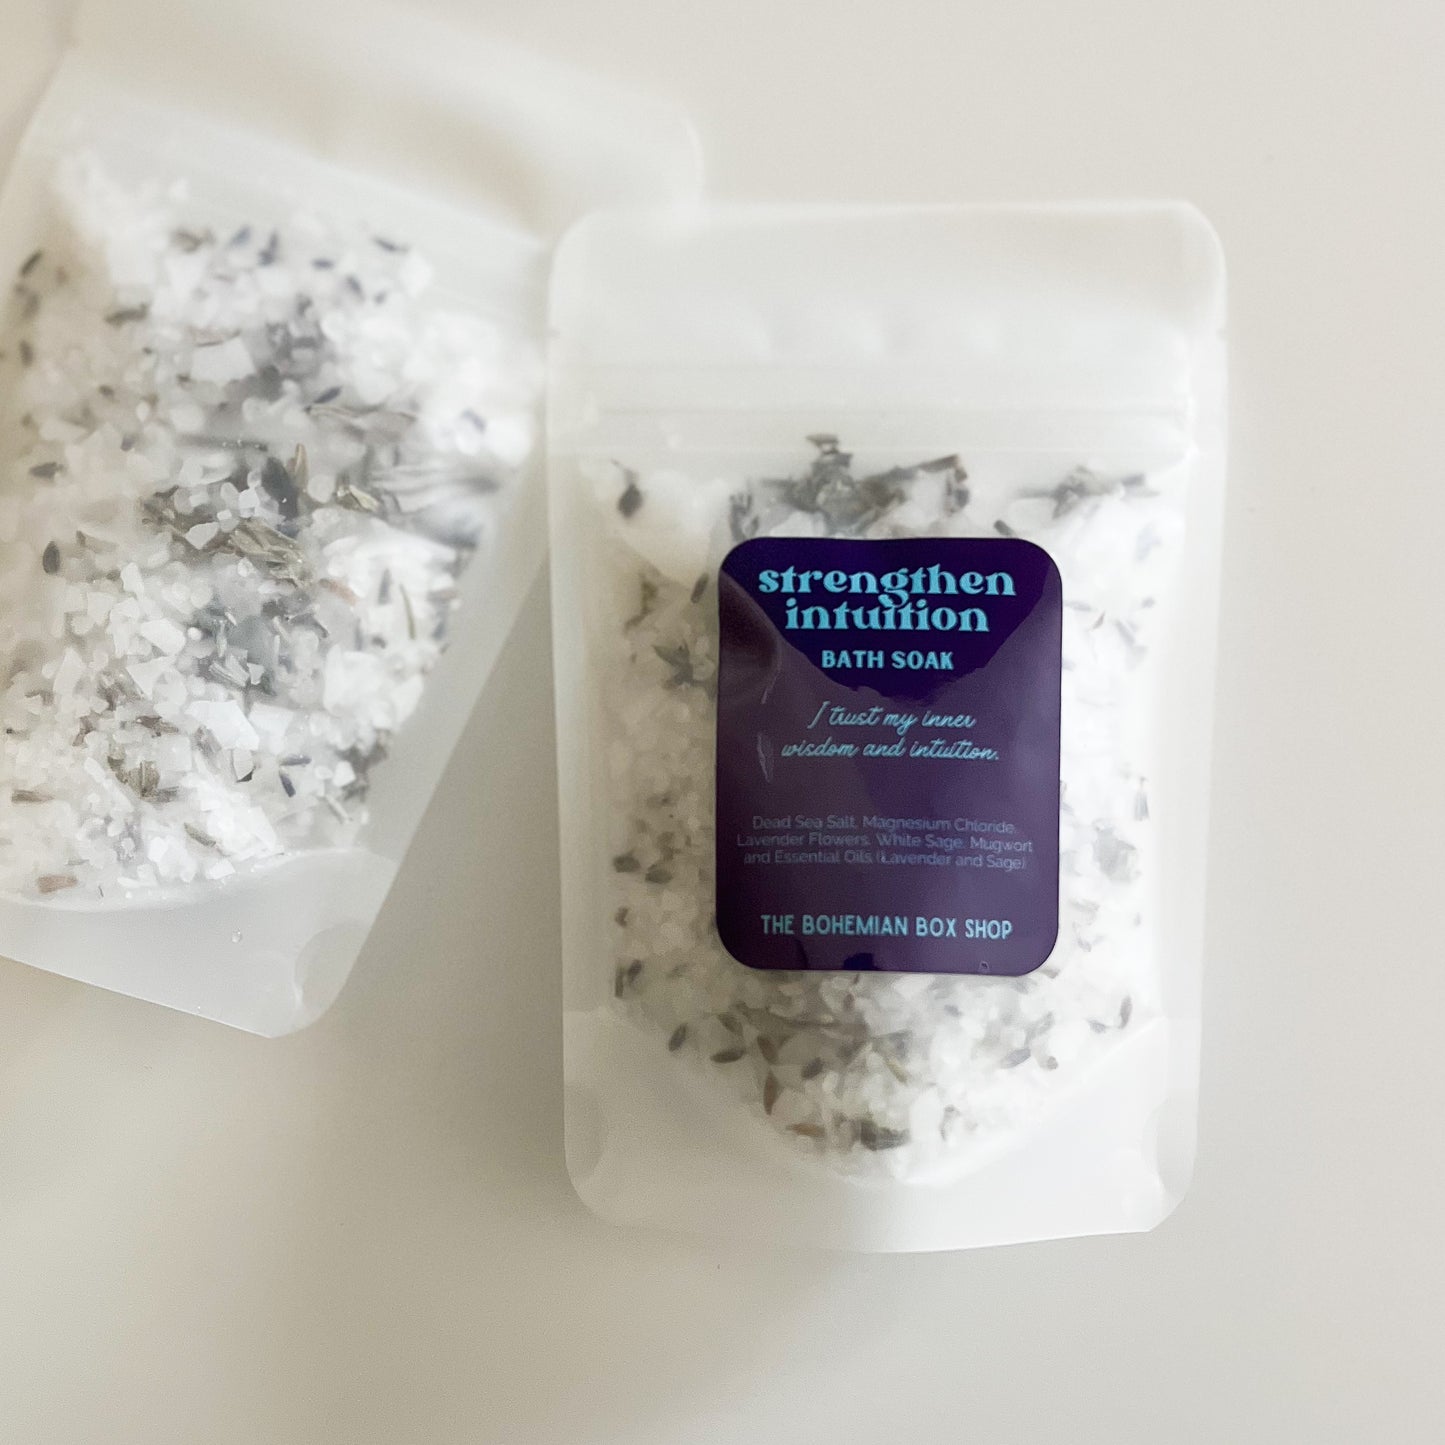 Strengthen Intuition Bath Soak With Affirmation / Bath Salts For Psychic Abilities, Increasing Intuition, Third Eye Opening, Spiritual Bath